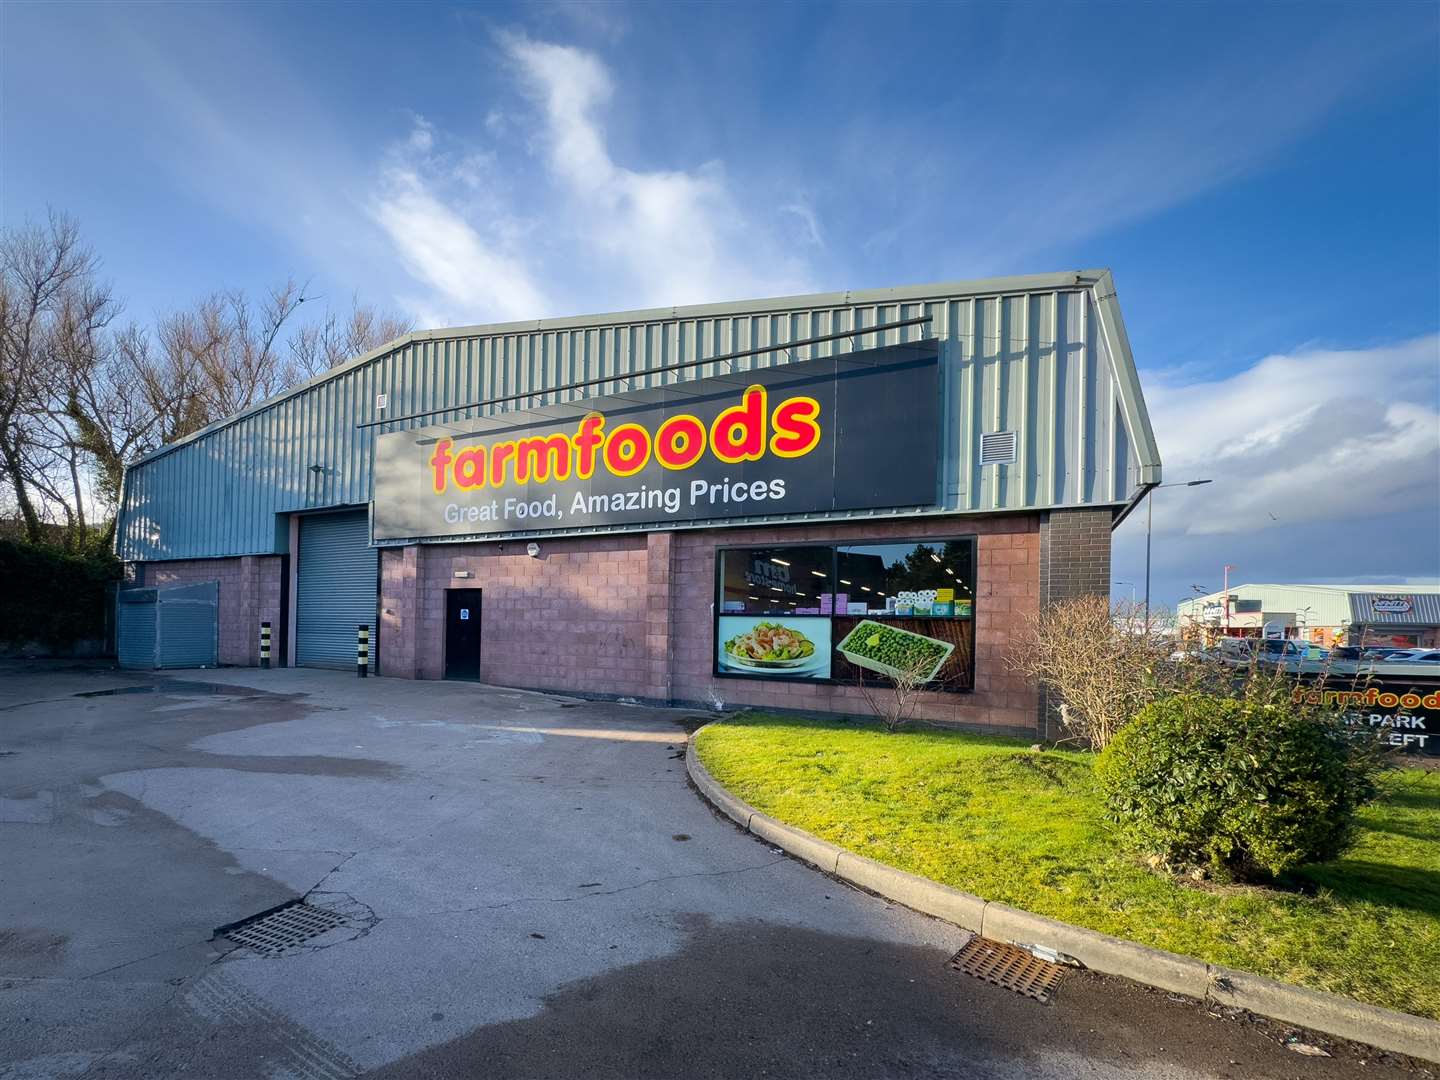 Household items, electrical goods and toiletries were stolen from Farmfoods.